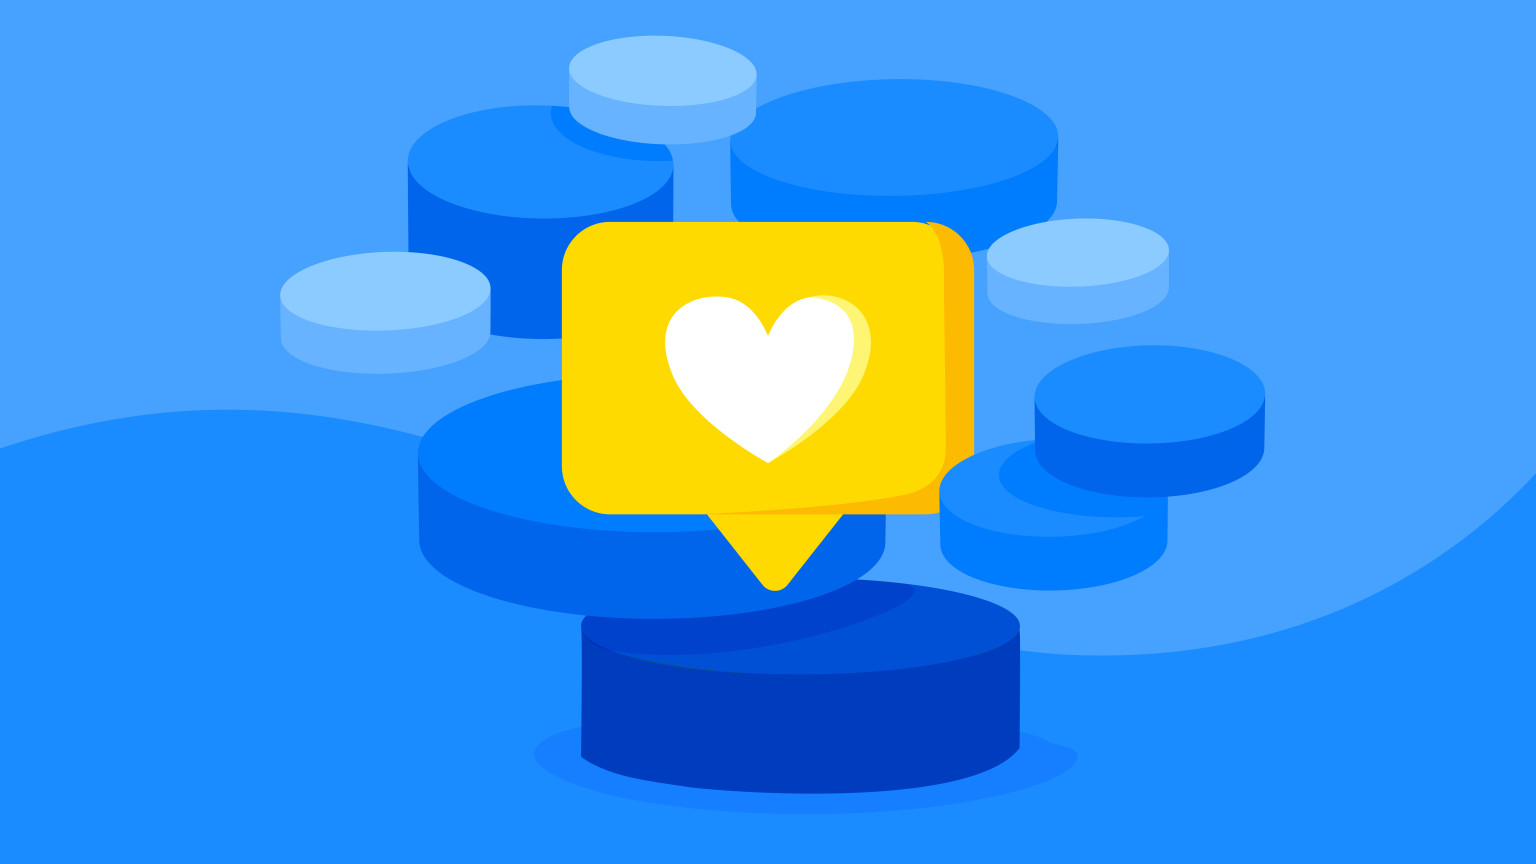 Illustration of a yellow heart icon against abstract shapes